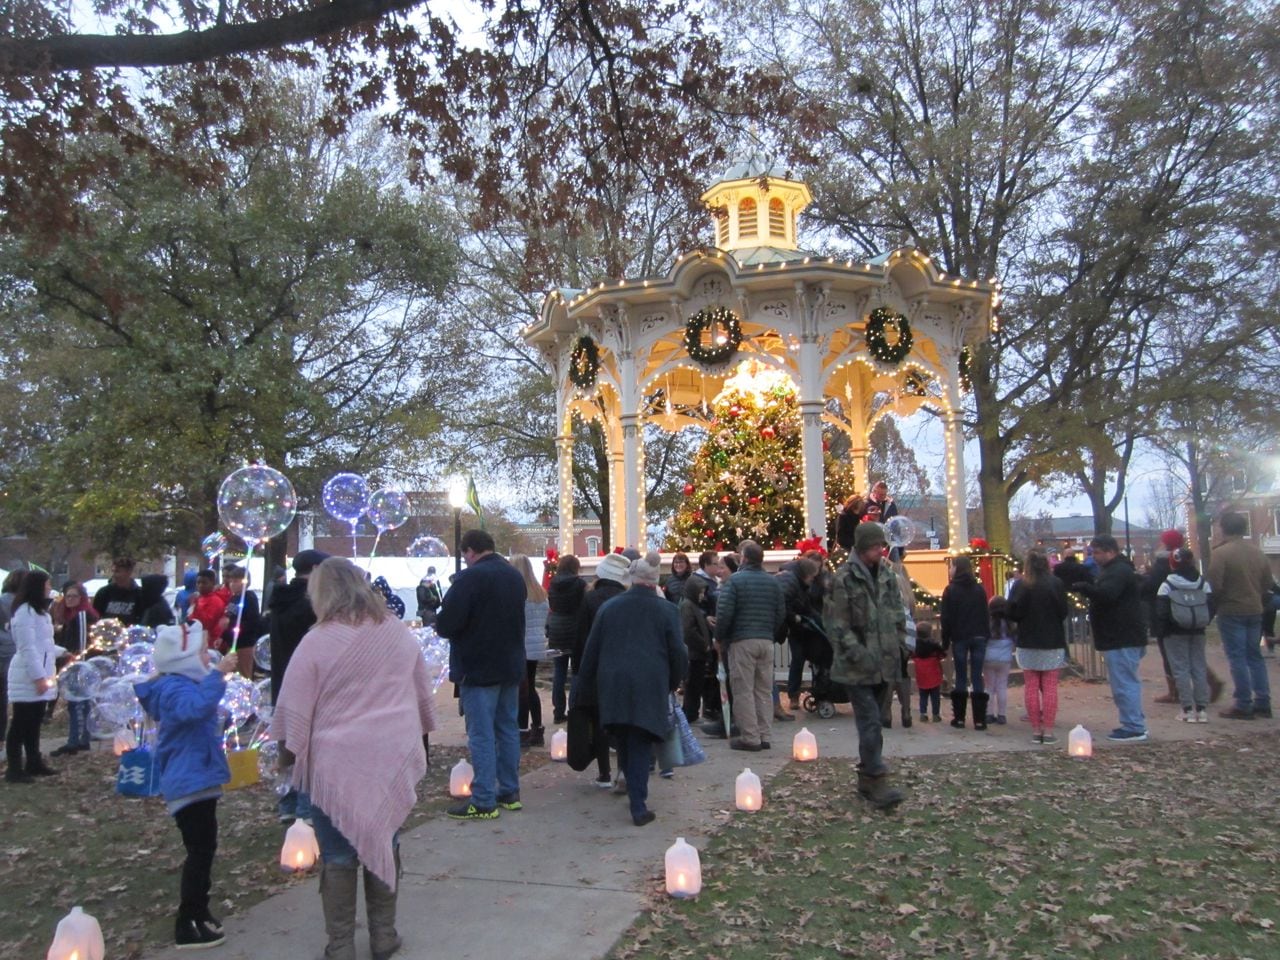 Medina’s 39th annual Candlelight Walk is upon us with a host of holiday activities